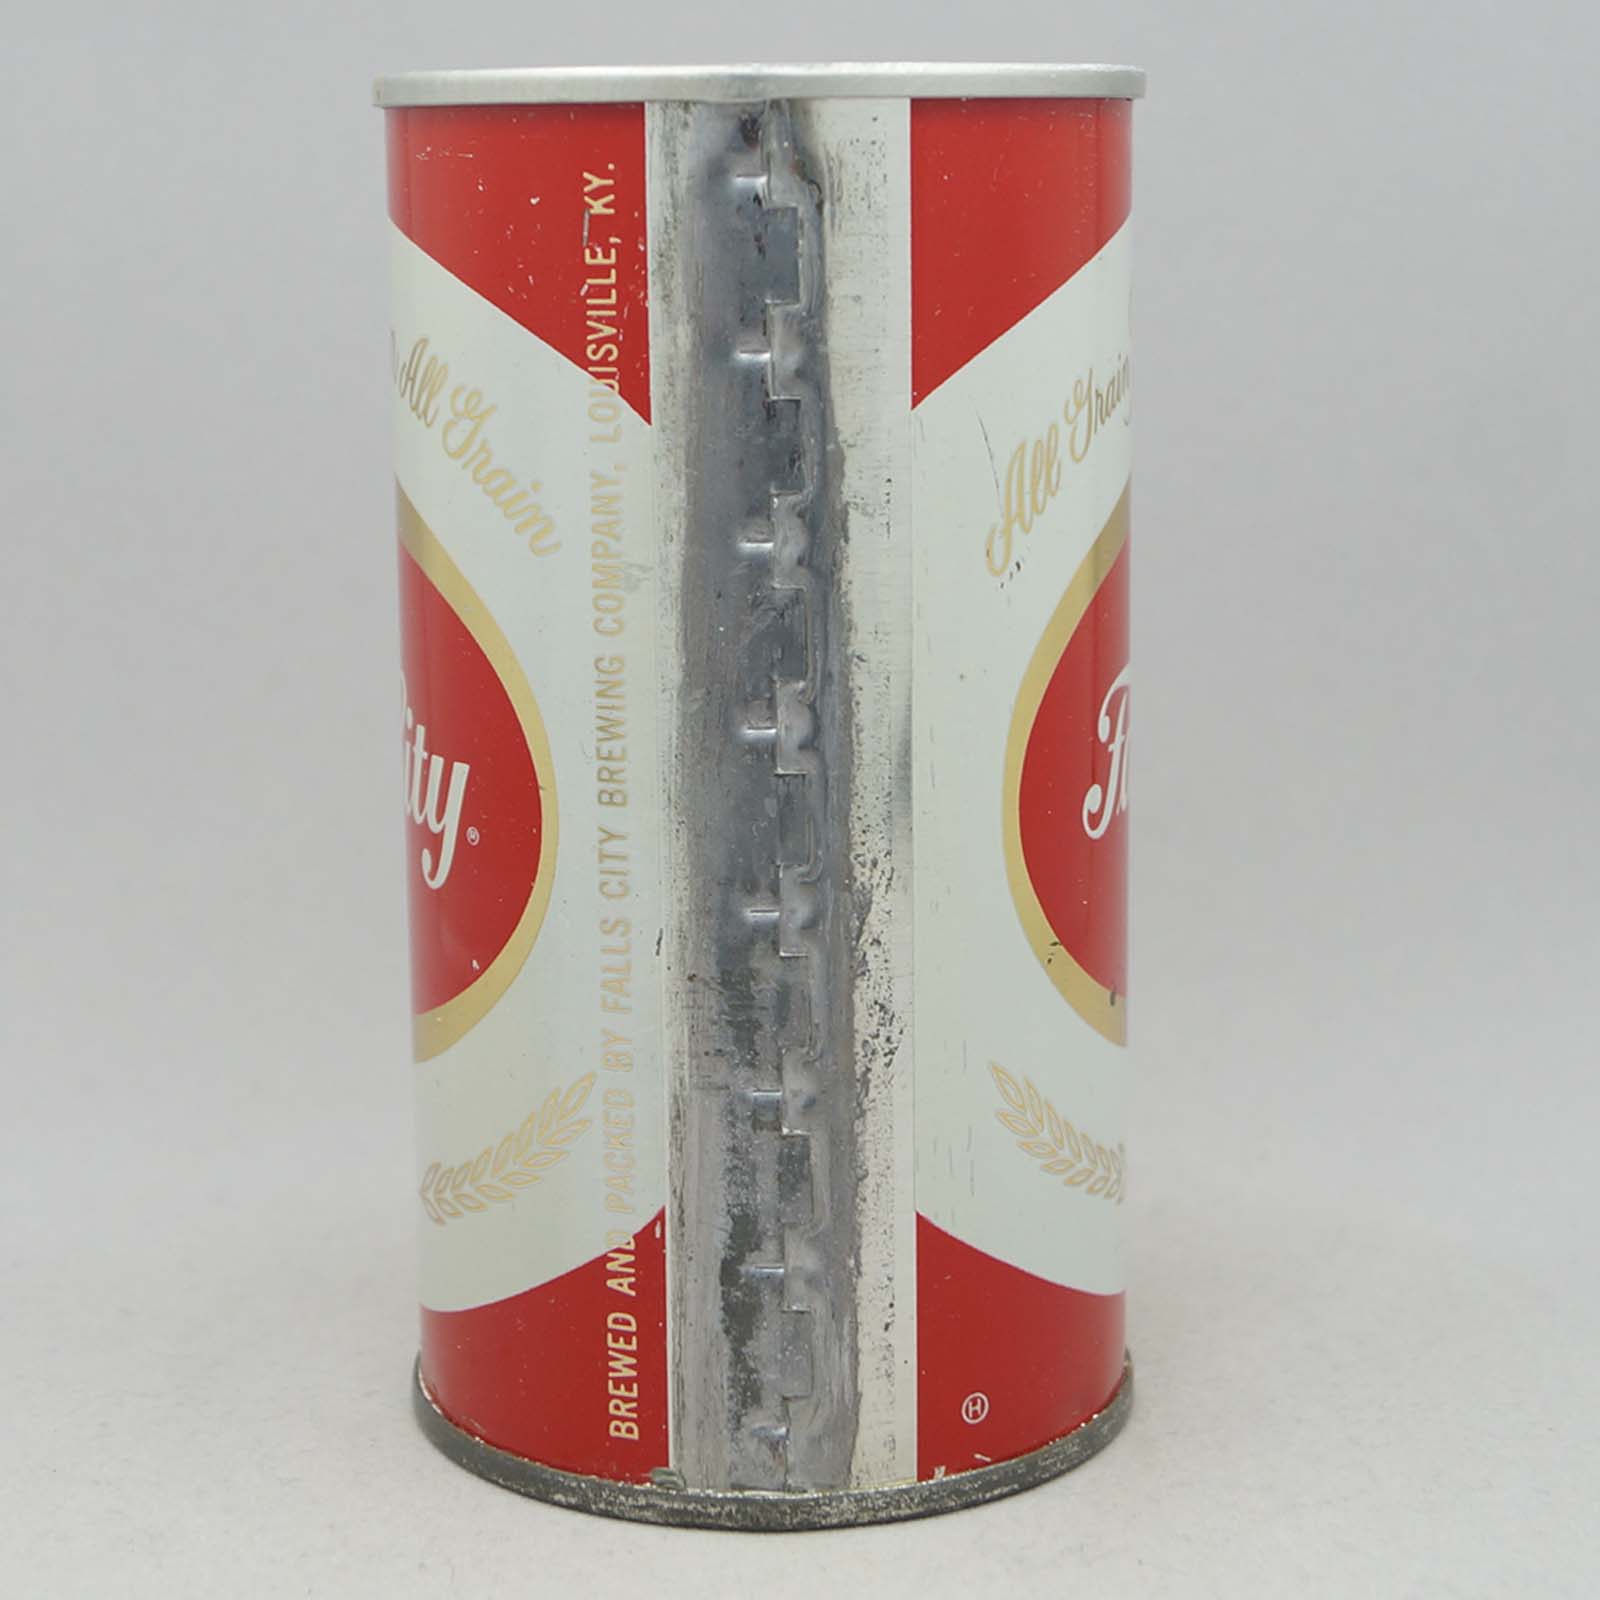 falls city 62-13 pull tab beer can 4